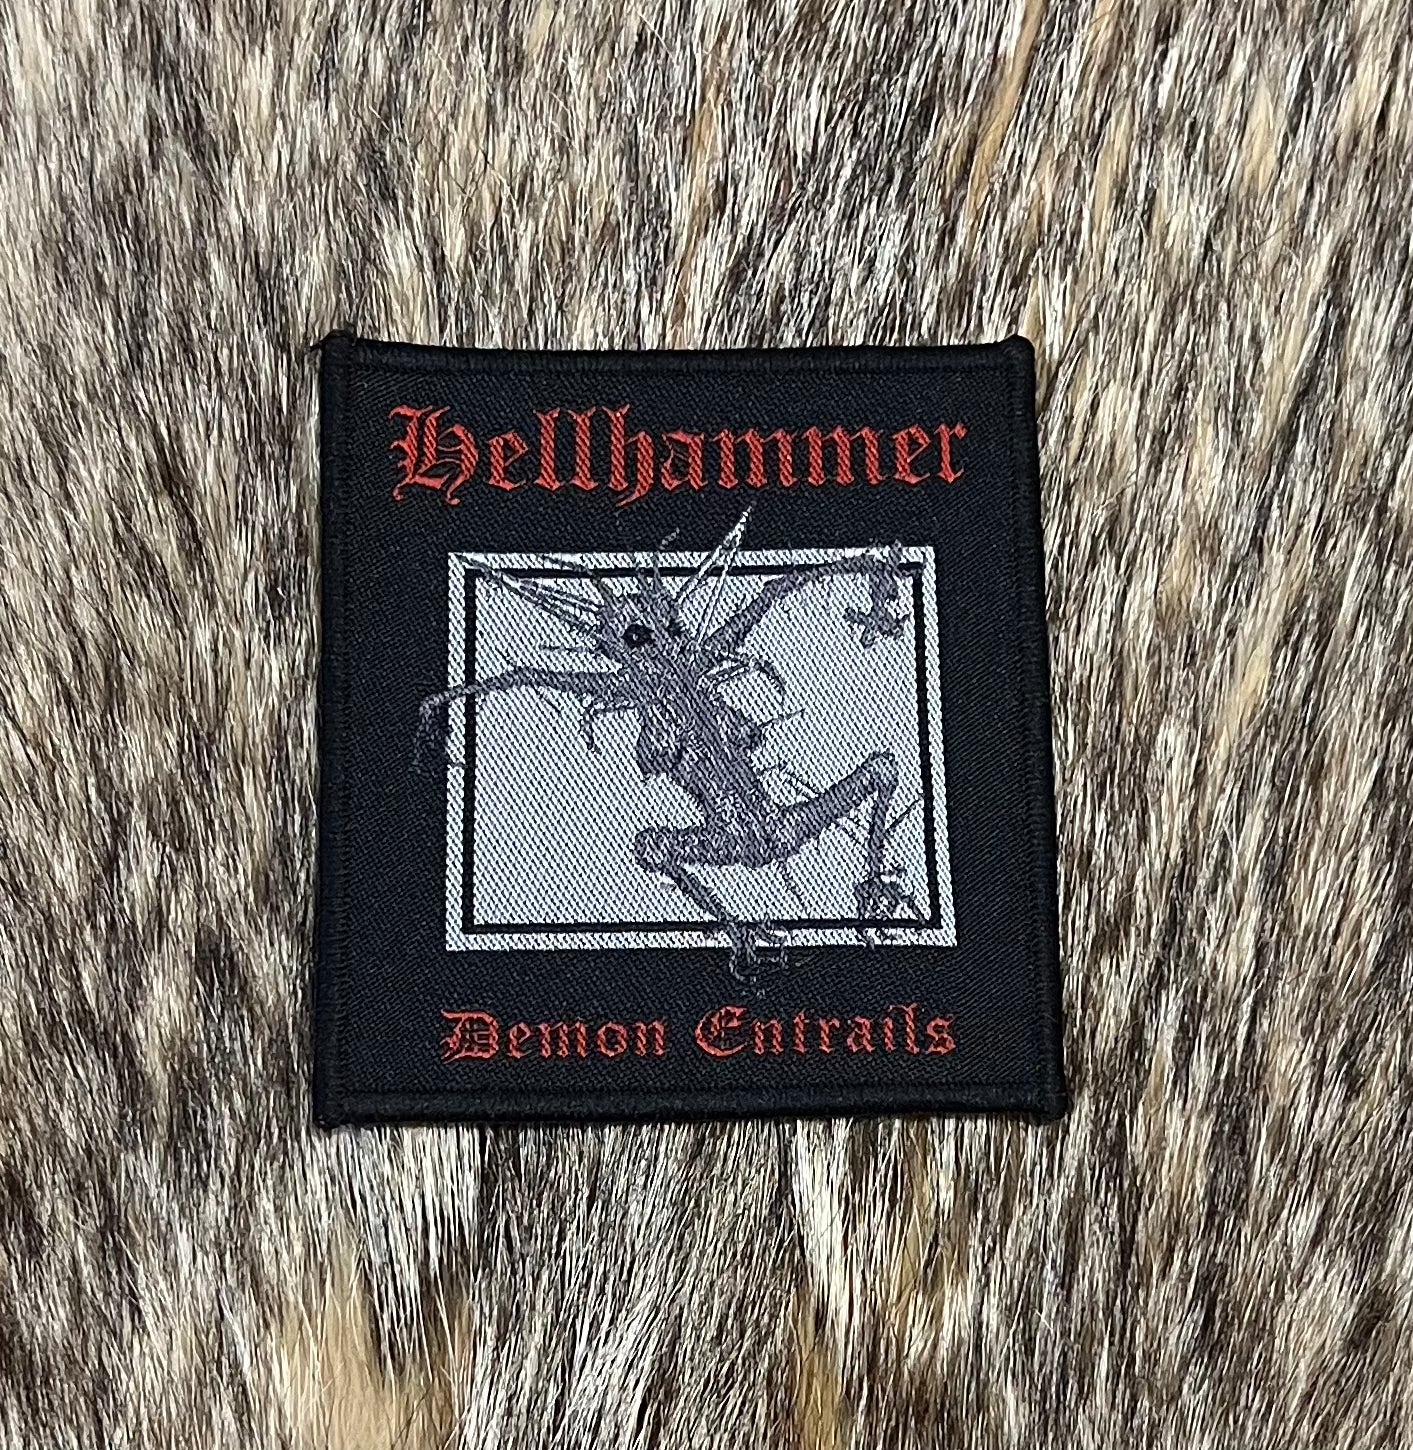 Hellhammer - Demon Entrails Patch